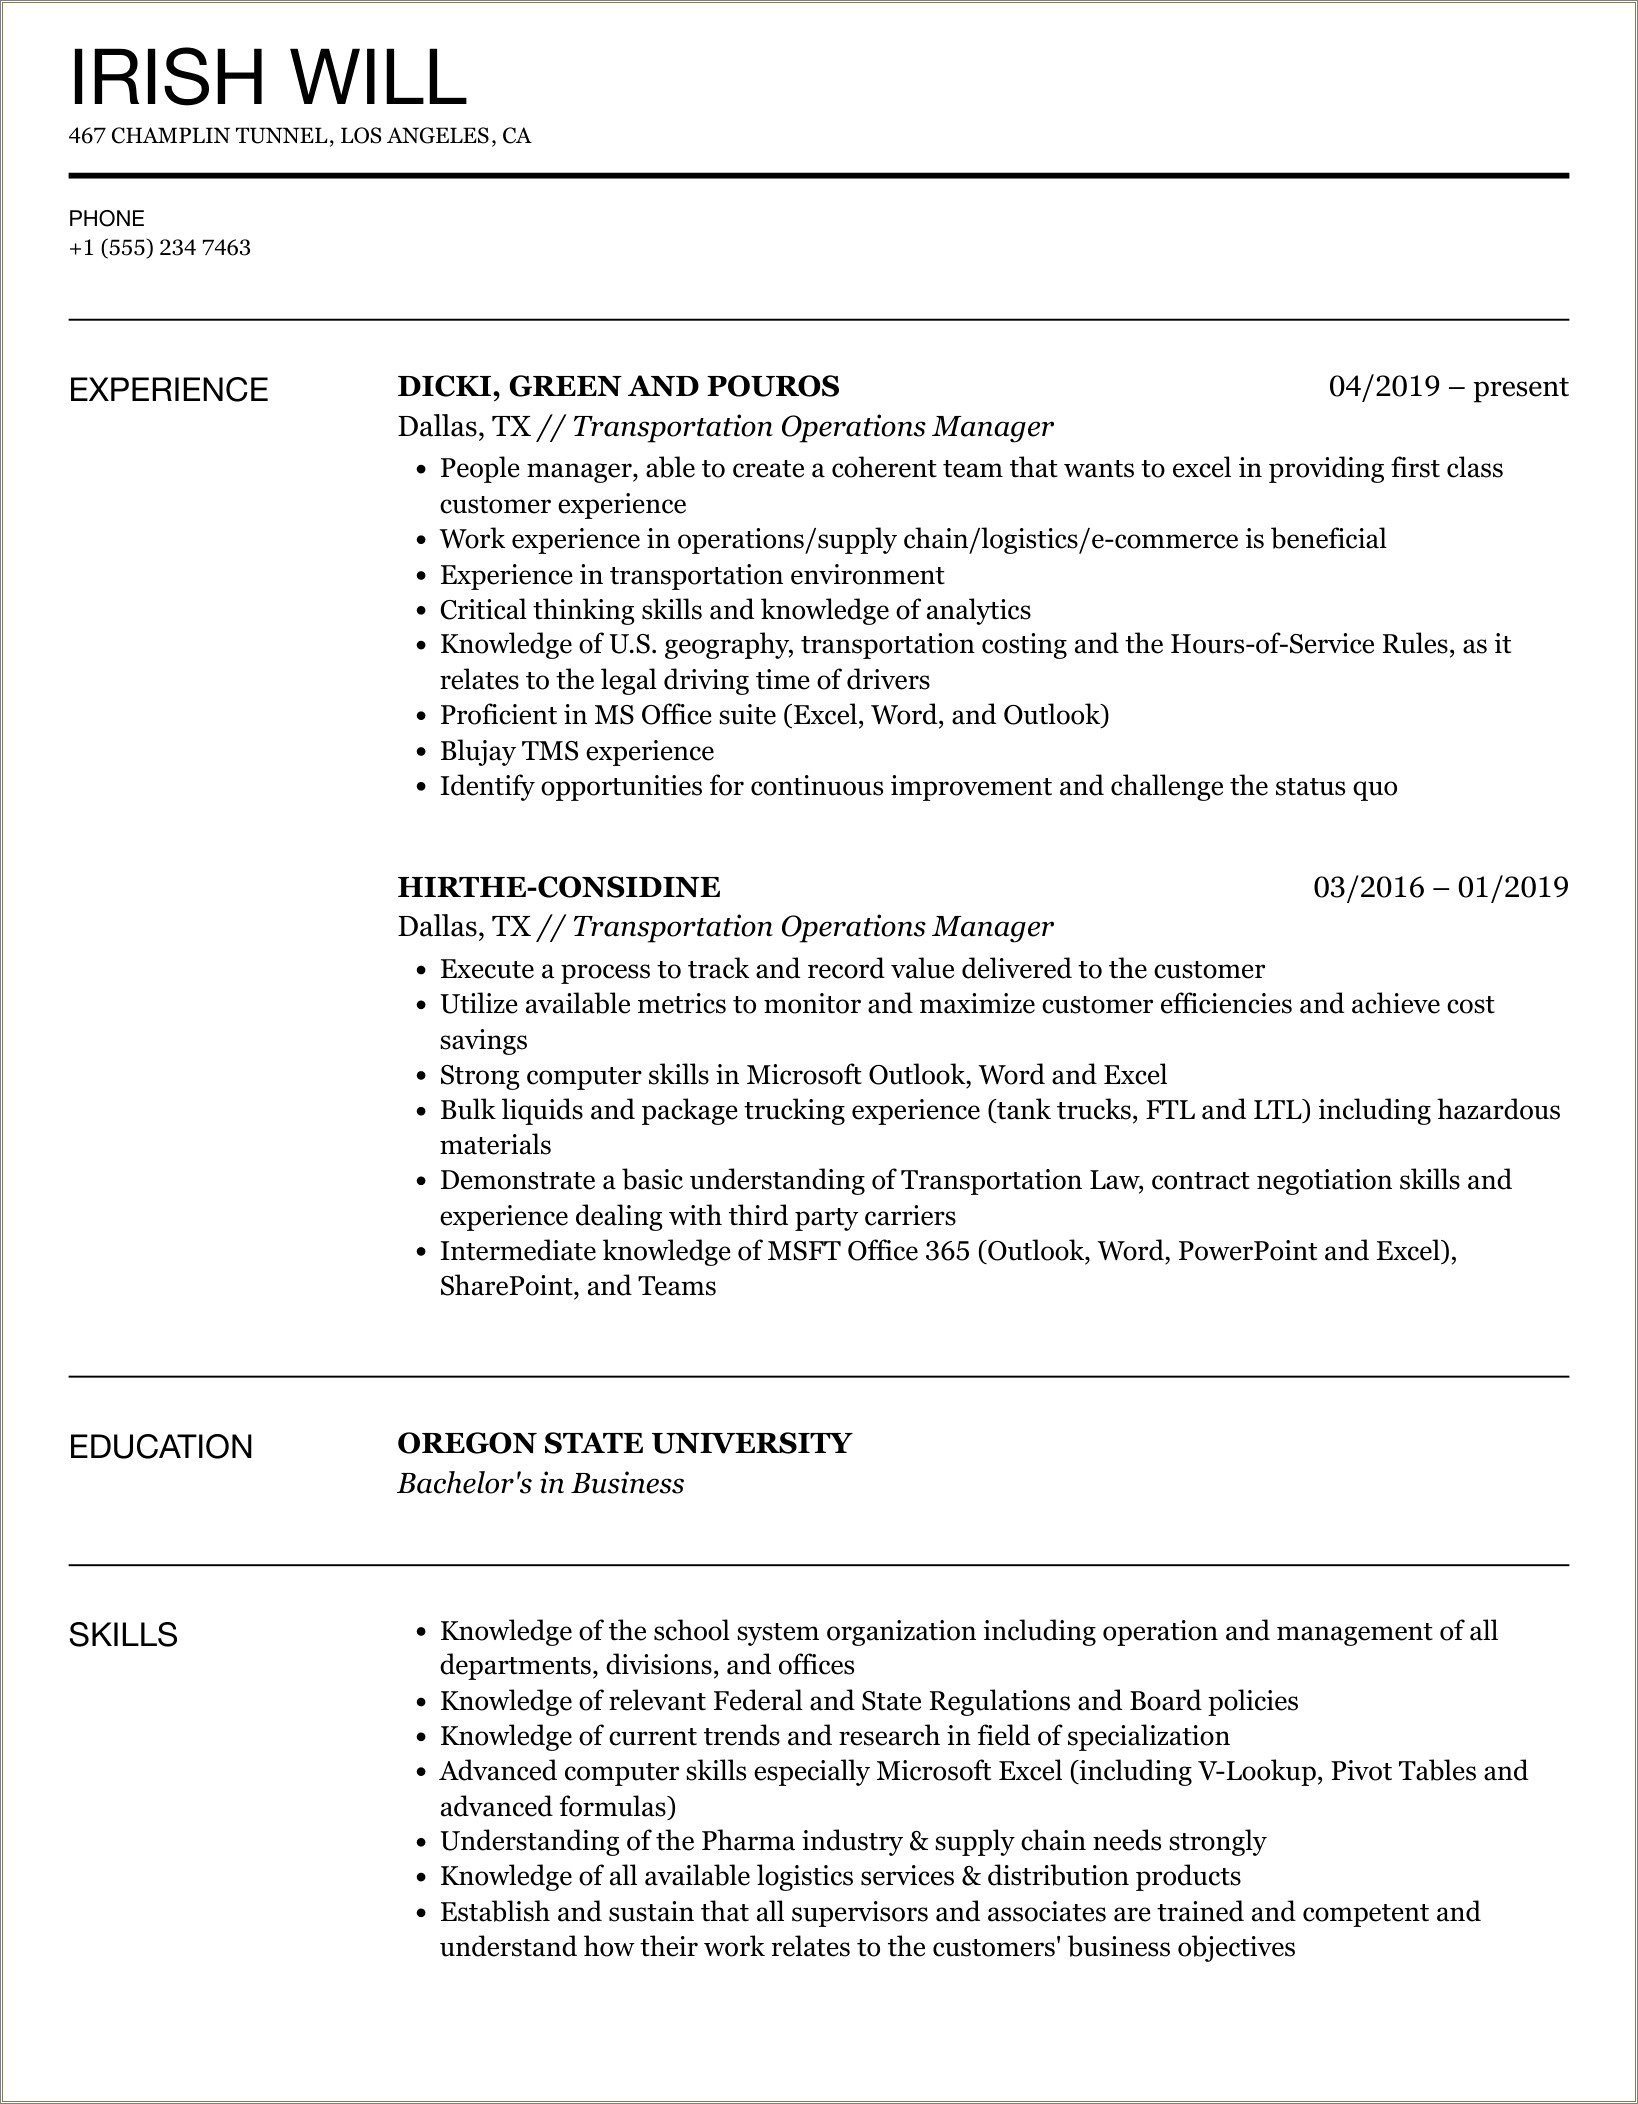 Sample Resume For Trucking Operations Manager